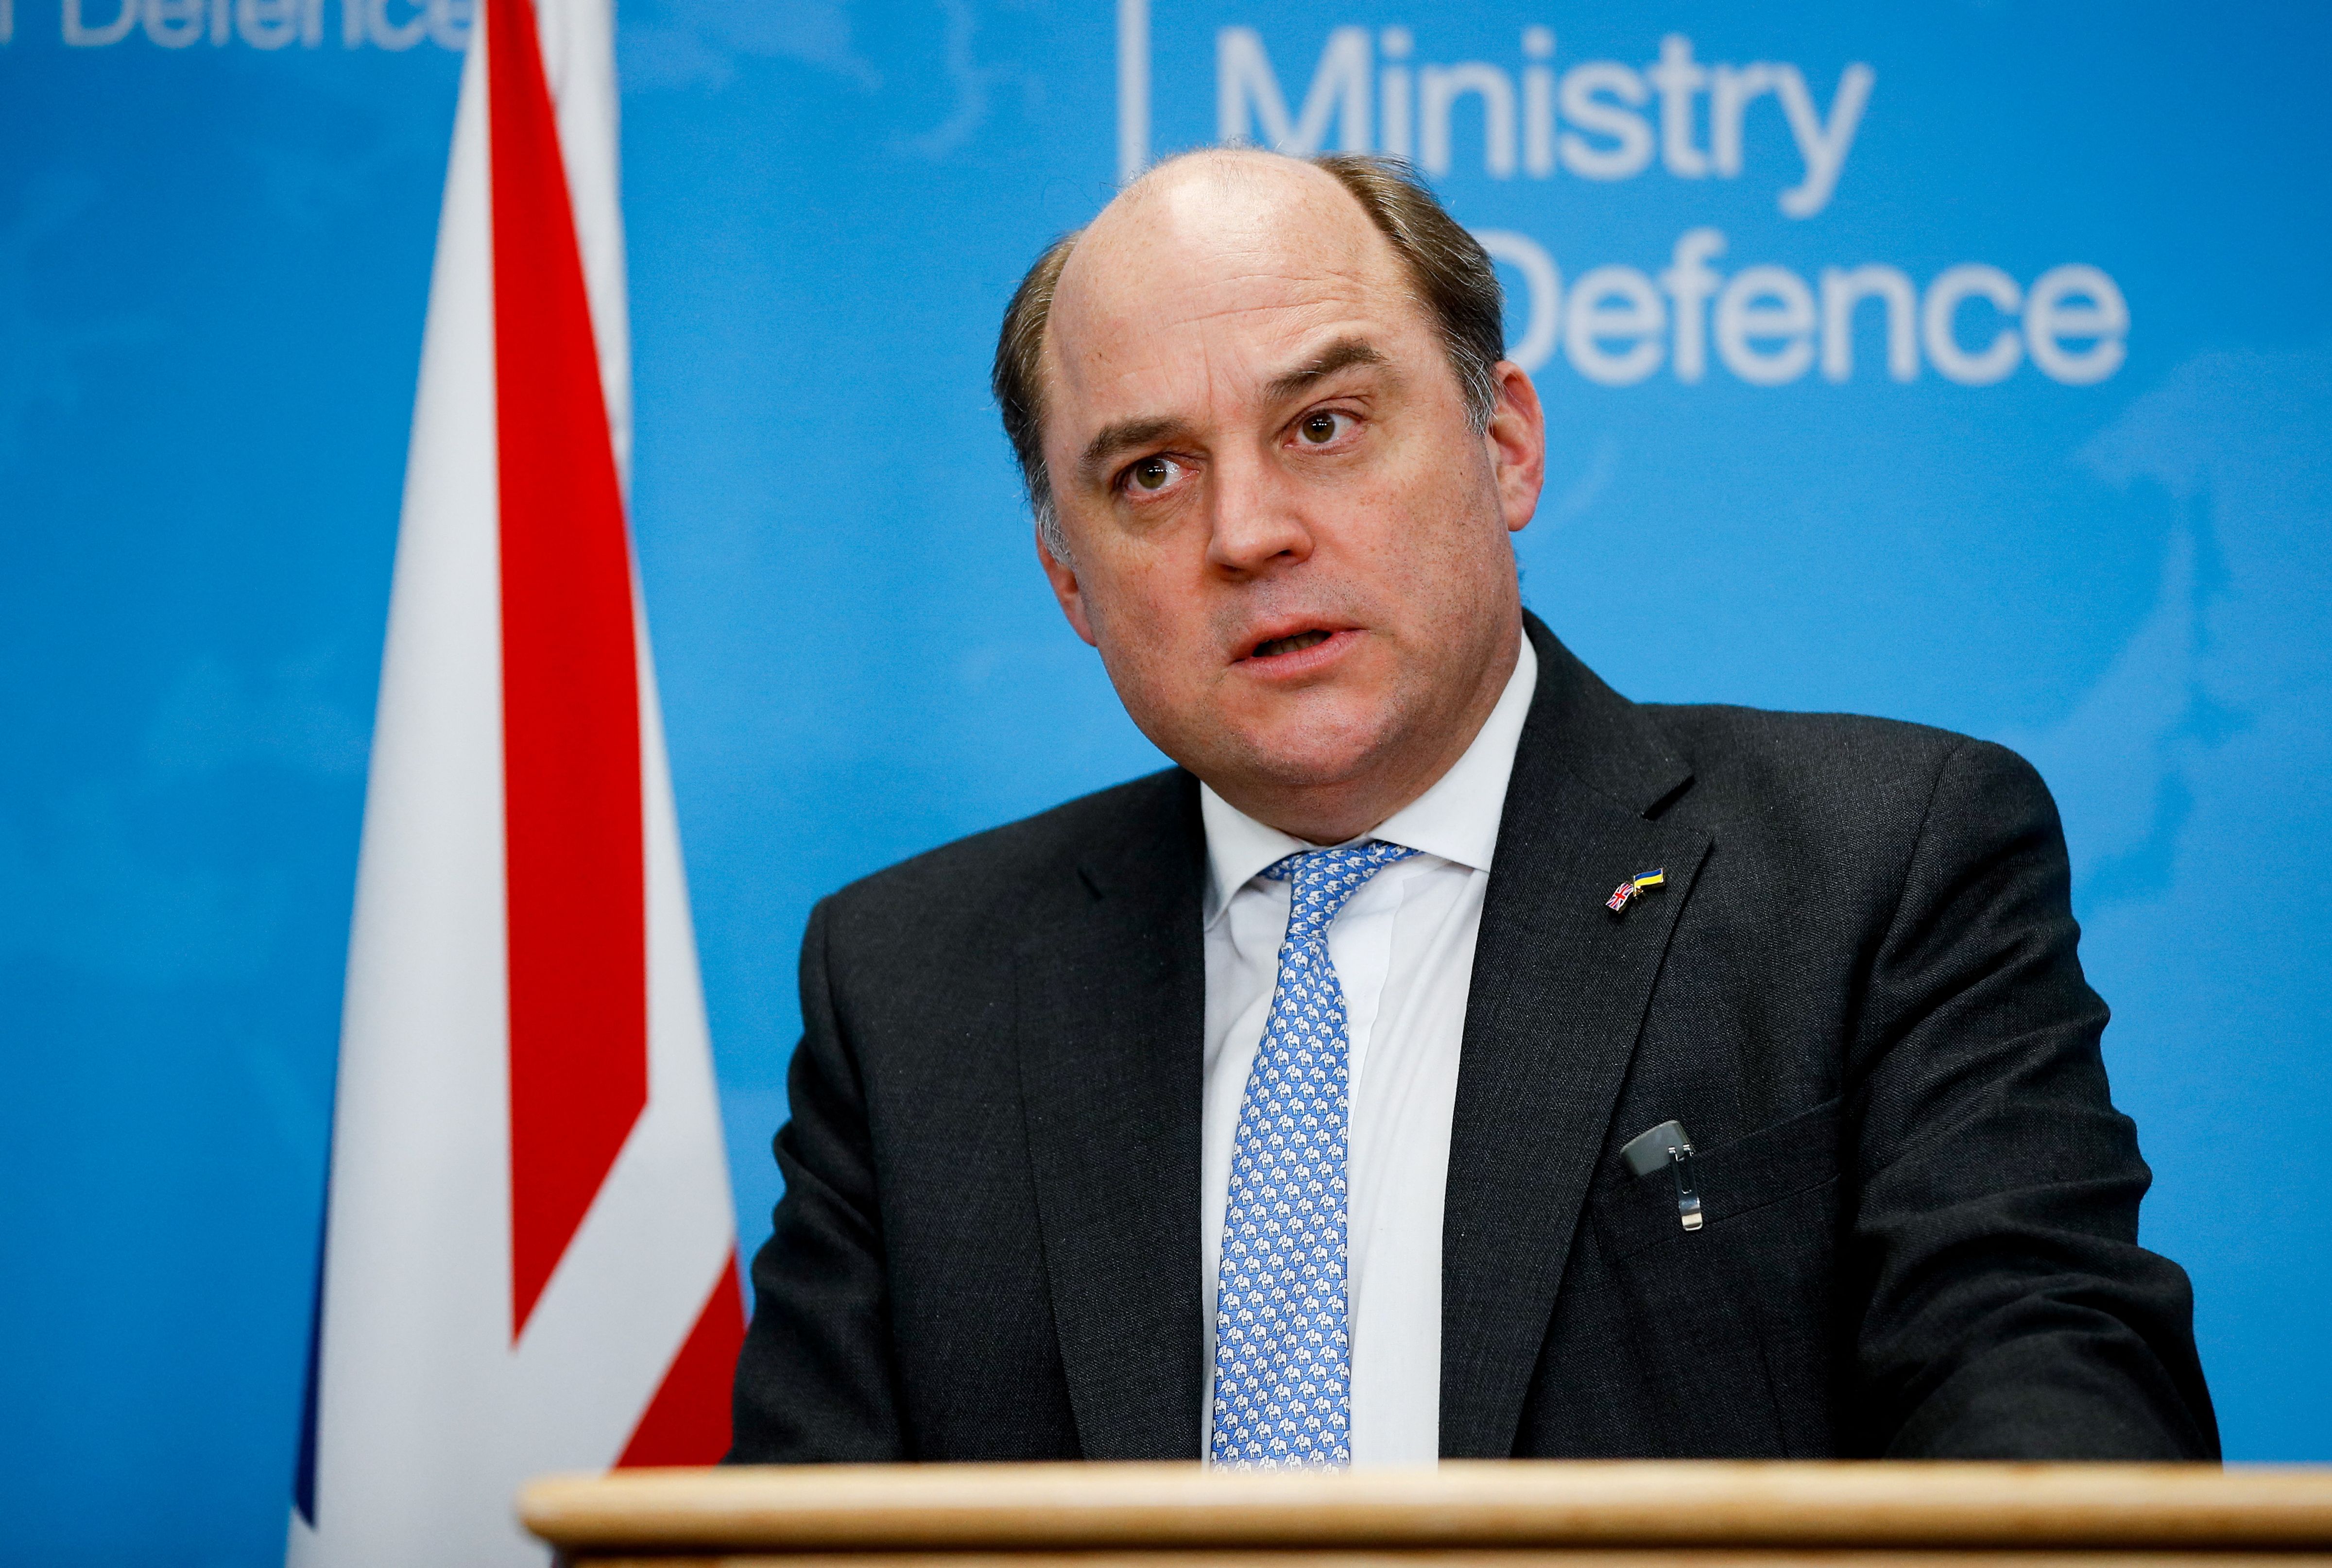 British Defence Secretary Ben Wallace holds a news conference with Ukrainian Defence Minister Oleksii Reznikov at the Ministry of Defence, amid Russia's invasion of Ukraine, in London, Britain, March 21, 2022. REUTERS/Peter Nicholls